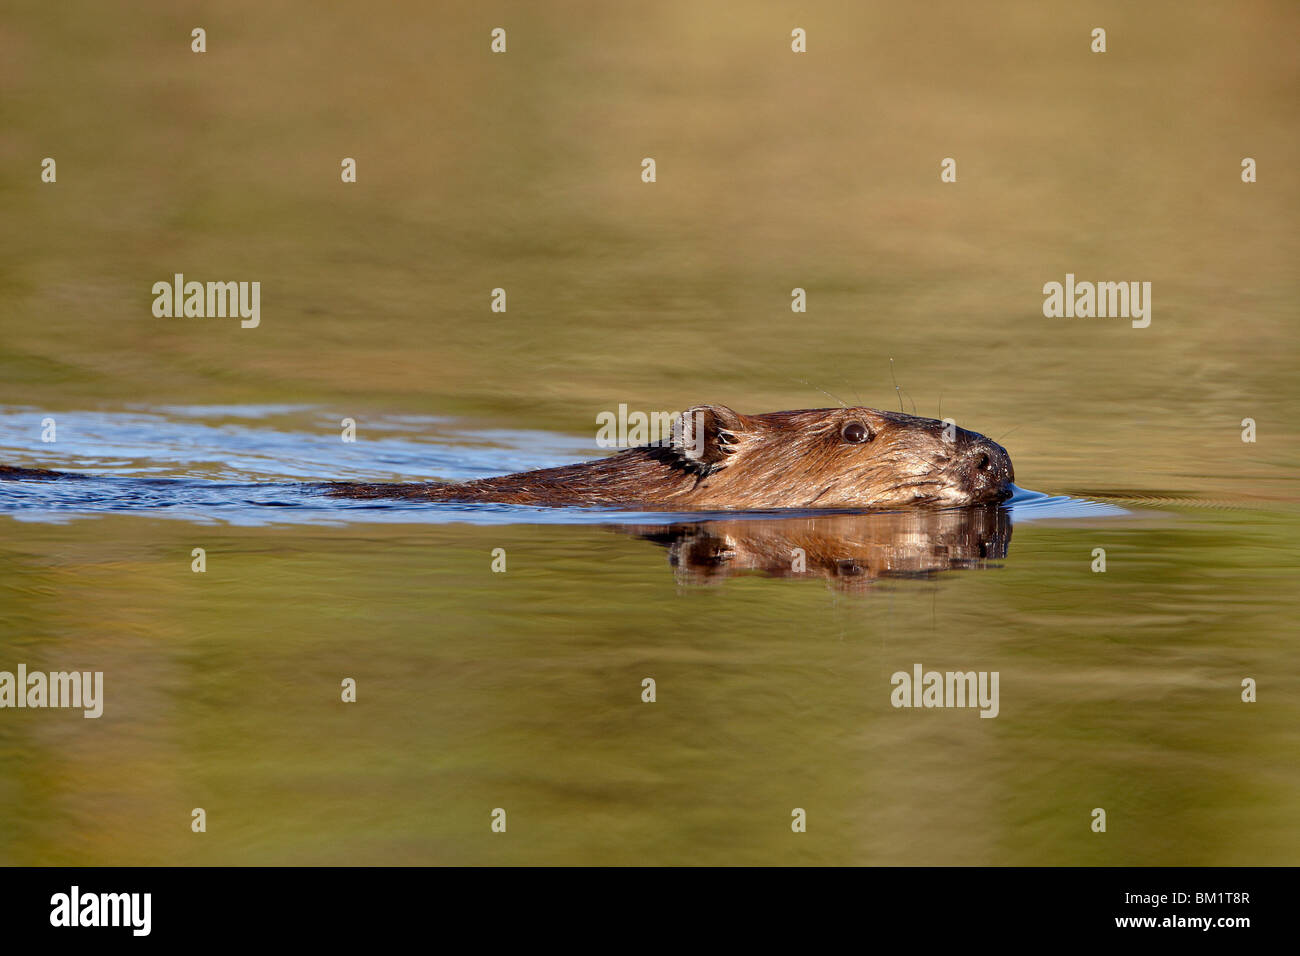 Beaver (Castor canadensis) swimming in a pond, Denali Highway, Alaska, United States of America, North America Stock Photo